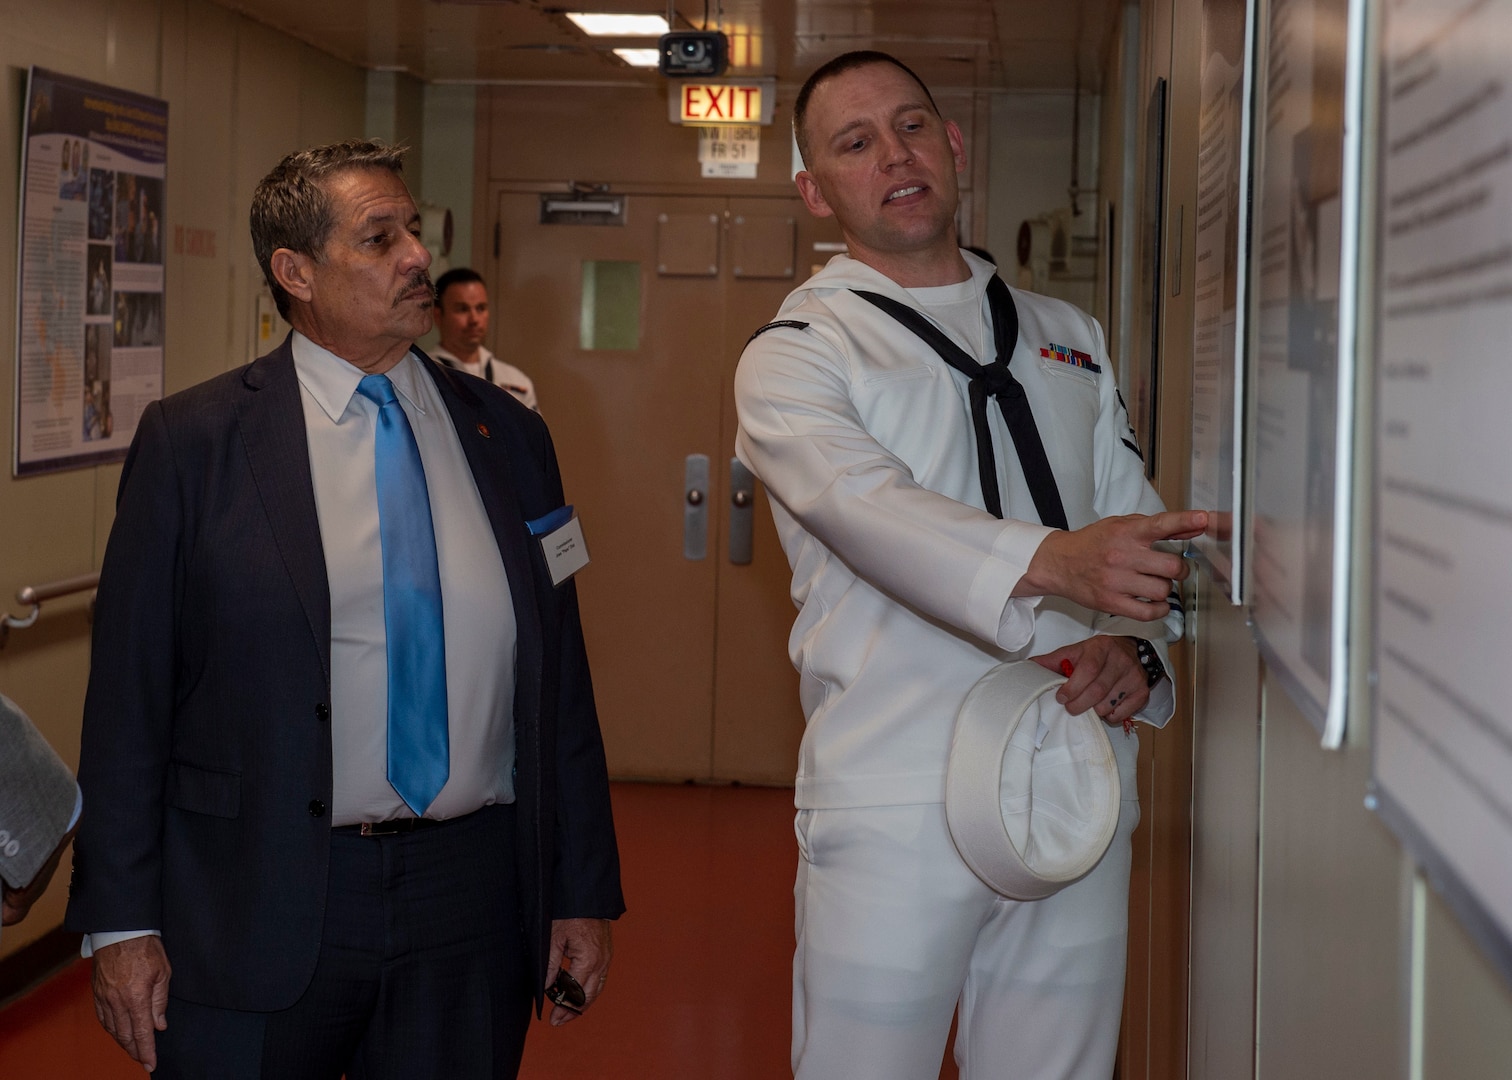 Hospital Corpsman 3rd Class Justin Bock guides a tour of the hospital ship USNS Comfort (T-AH 20).